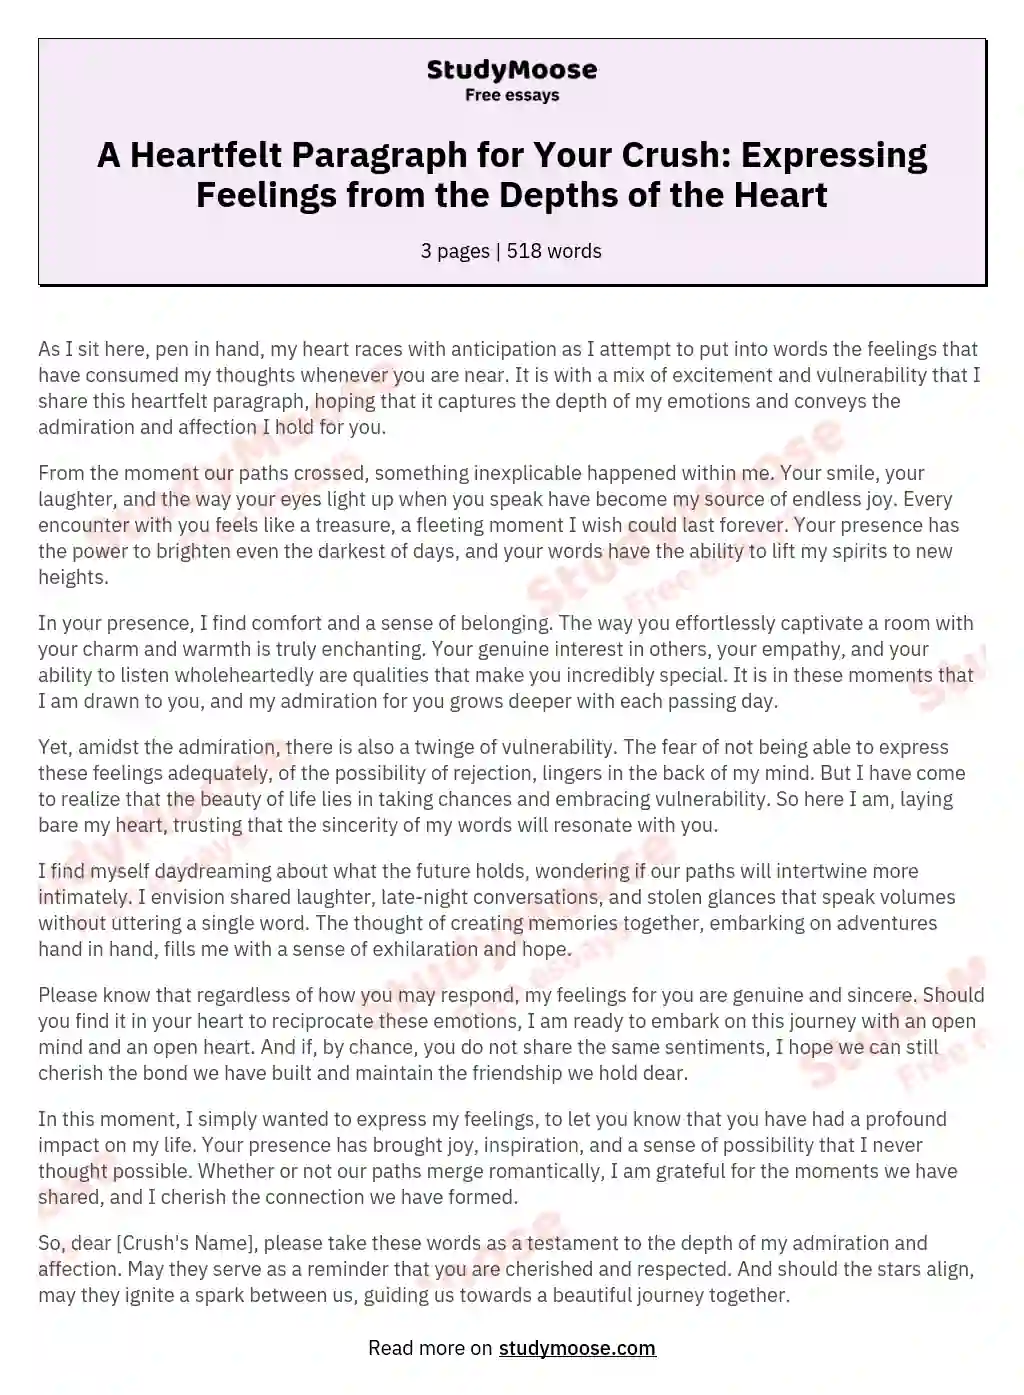 A Heartfelt Paragraph for Your Crush: Expressing Feelings from the Depths of the Heart essay